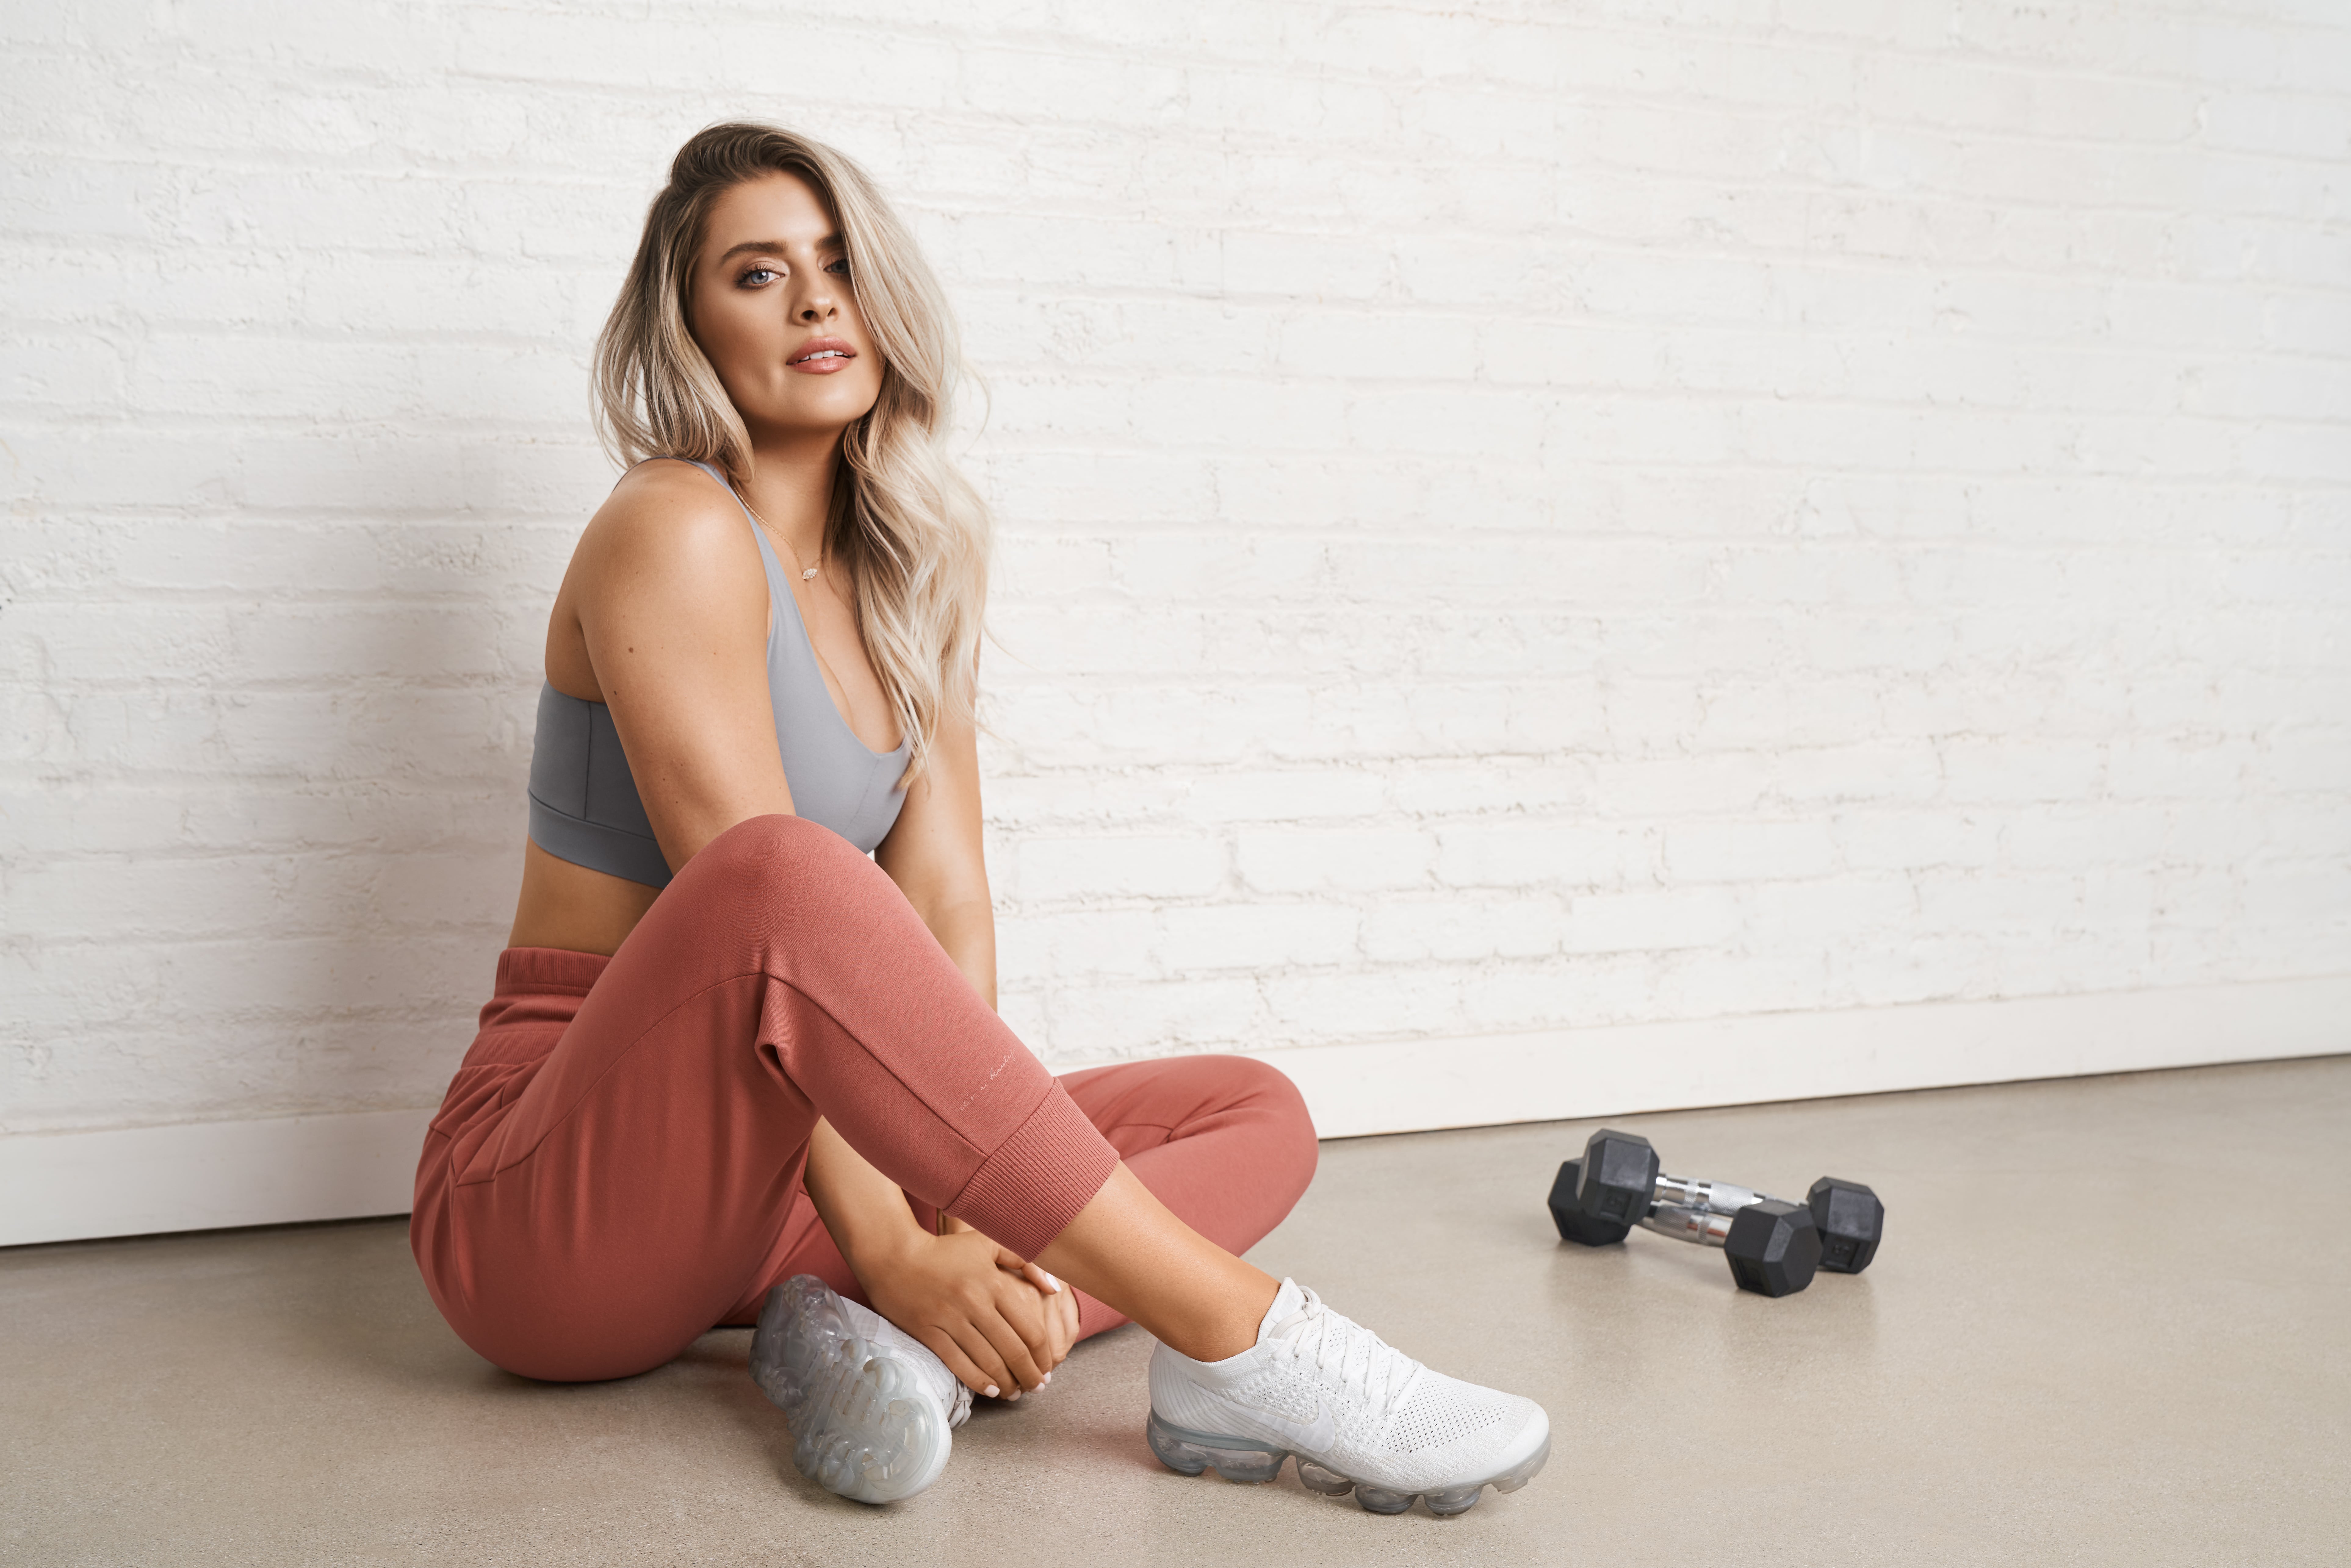 Gymshark launches latest accessory in collaboration with Whitney Ado